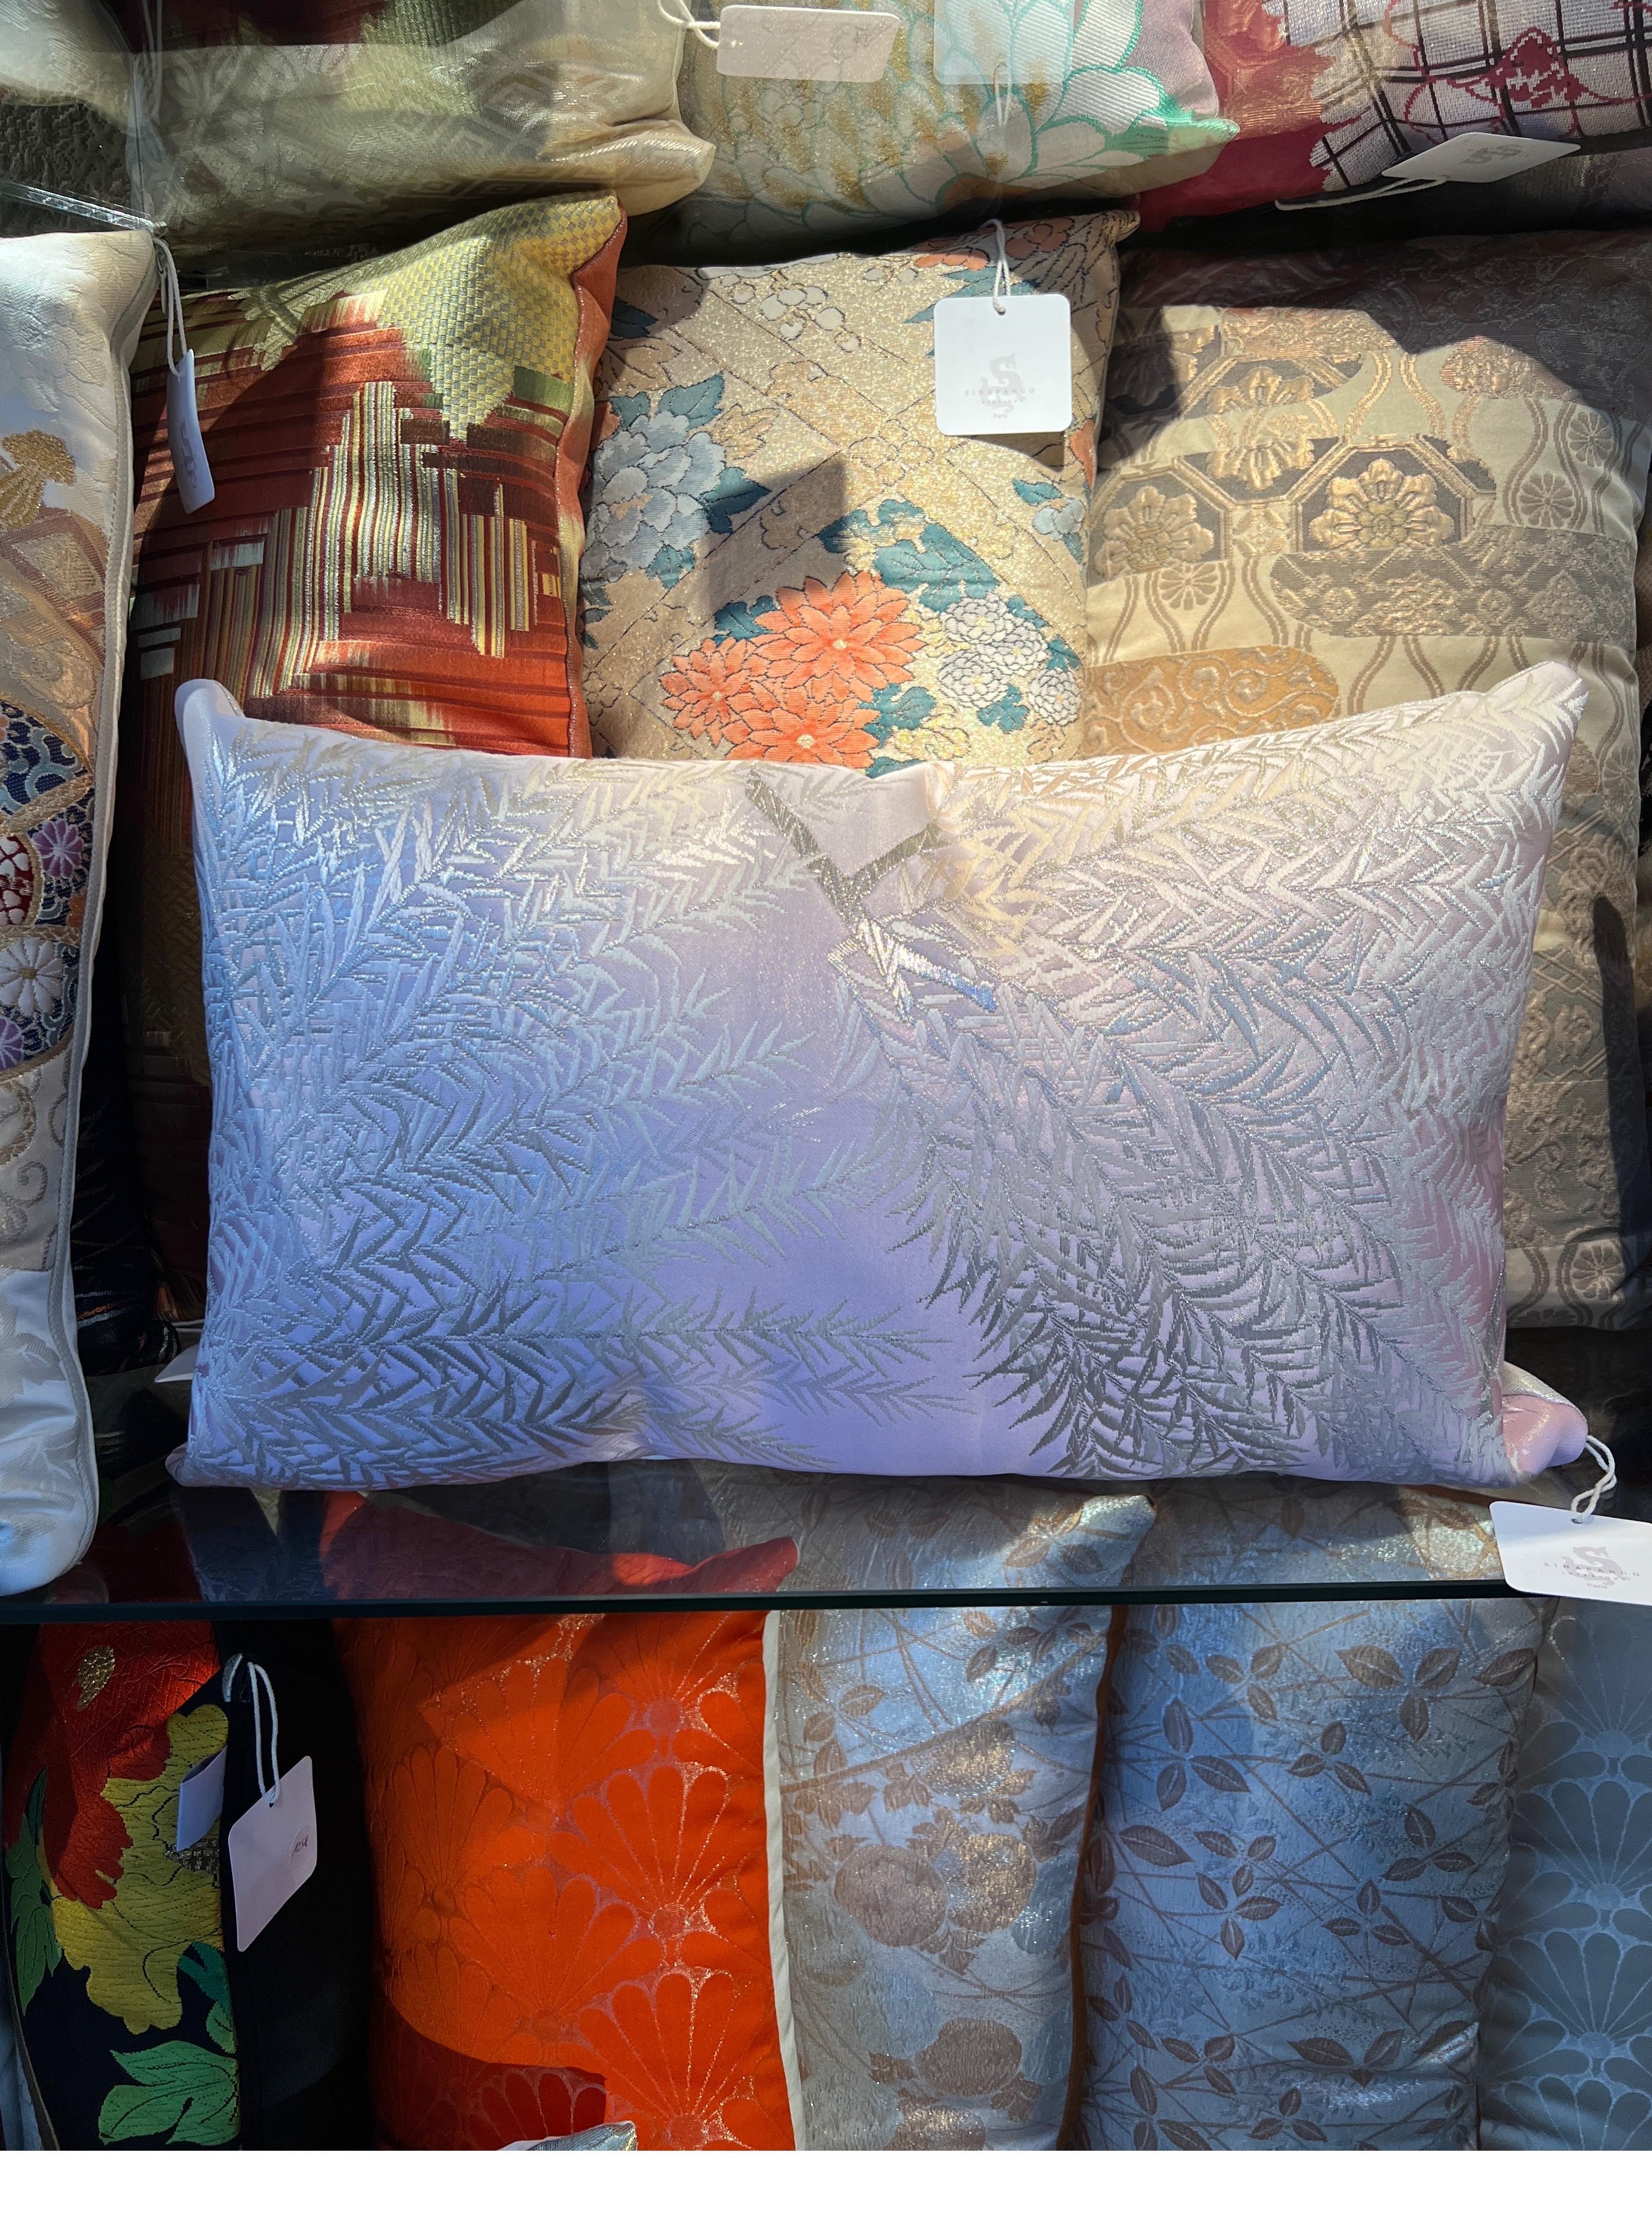 A spectacular lombar pillow wowen in pale pink and metal threads.

Buying handmade cushions from Sinapango Interiors Paris, crafted from vintage Obi silk made in Nishijin district in Kyoto Japan not only adds an elegant touch but also brings a